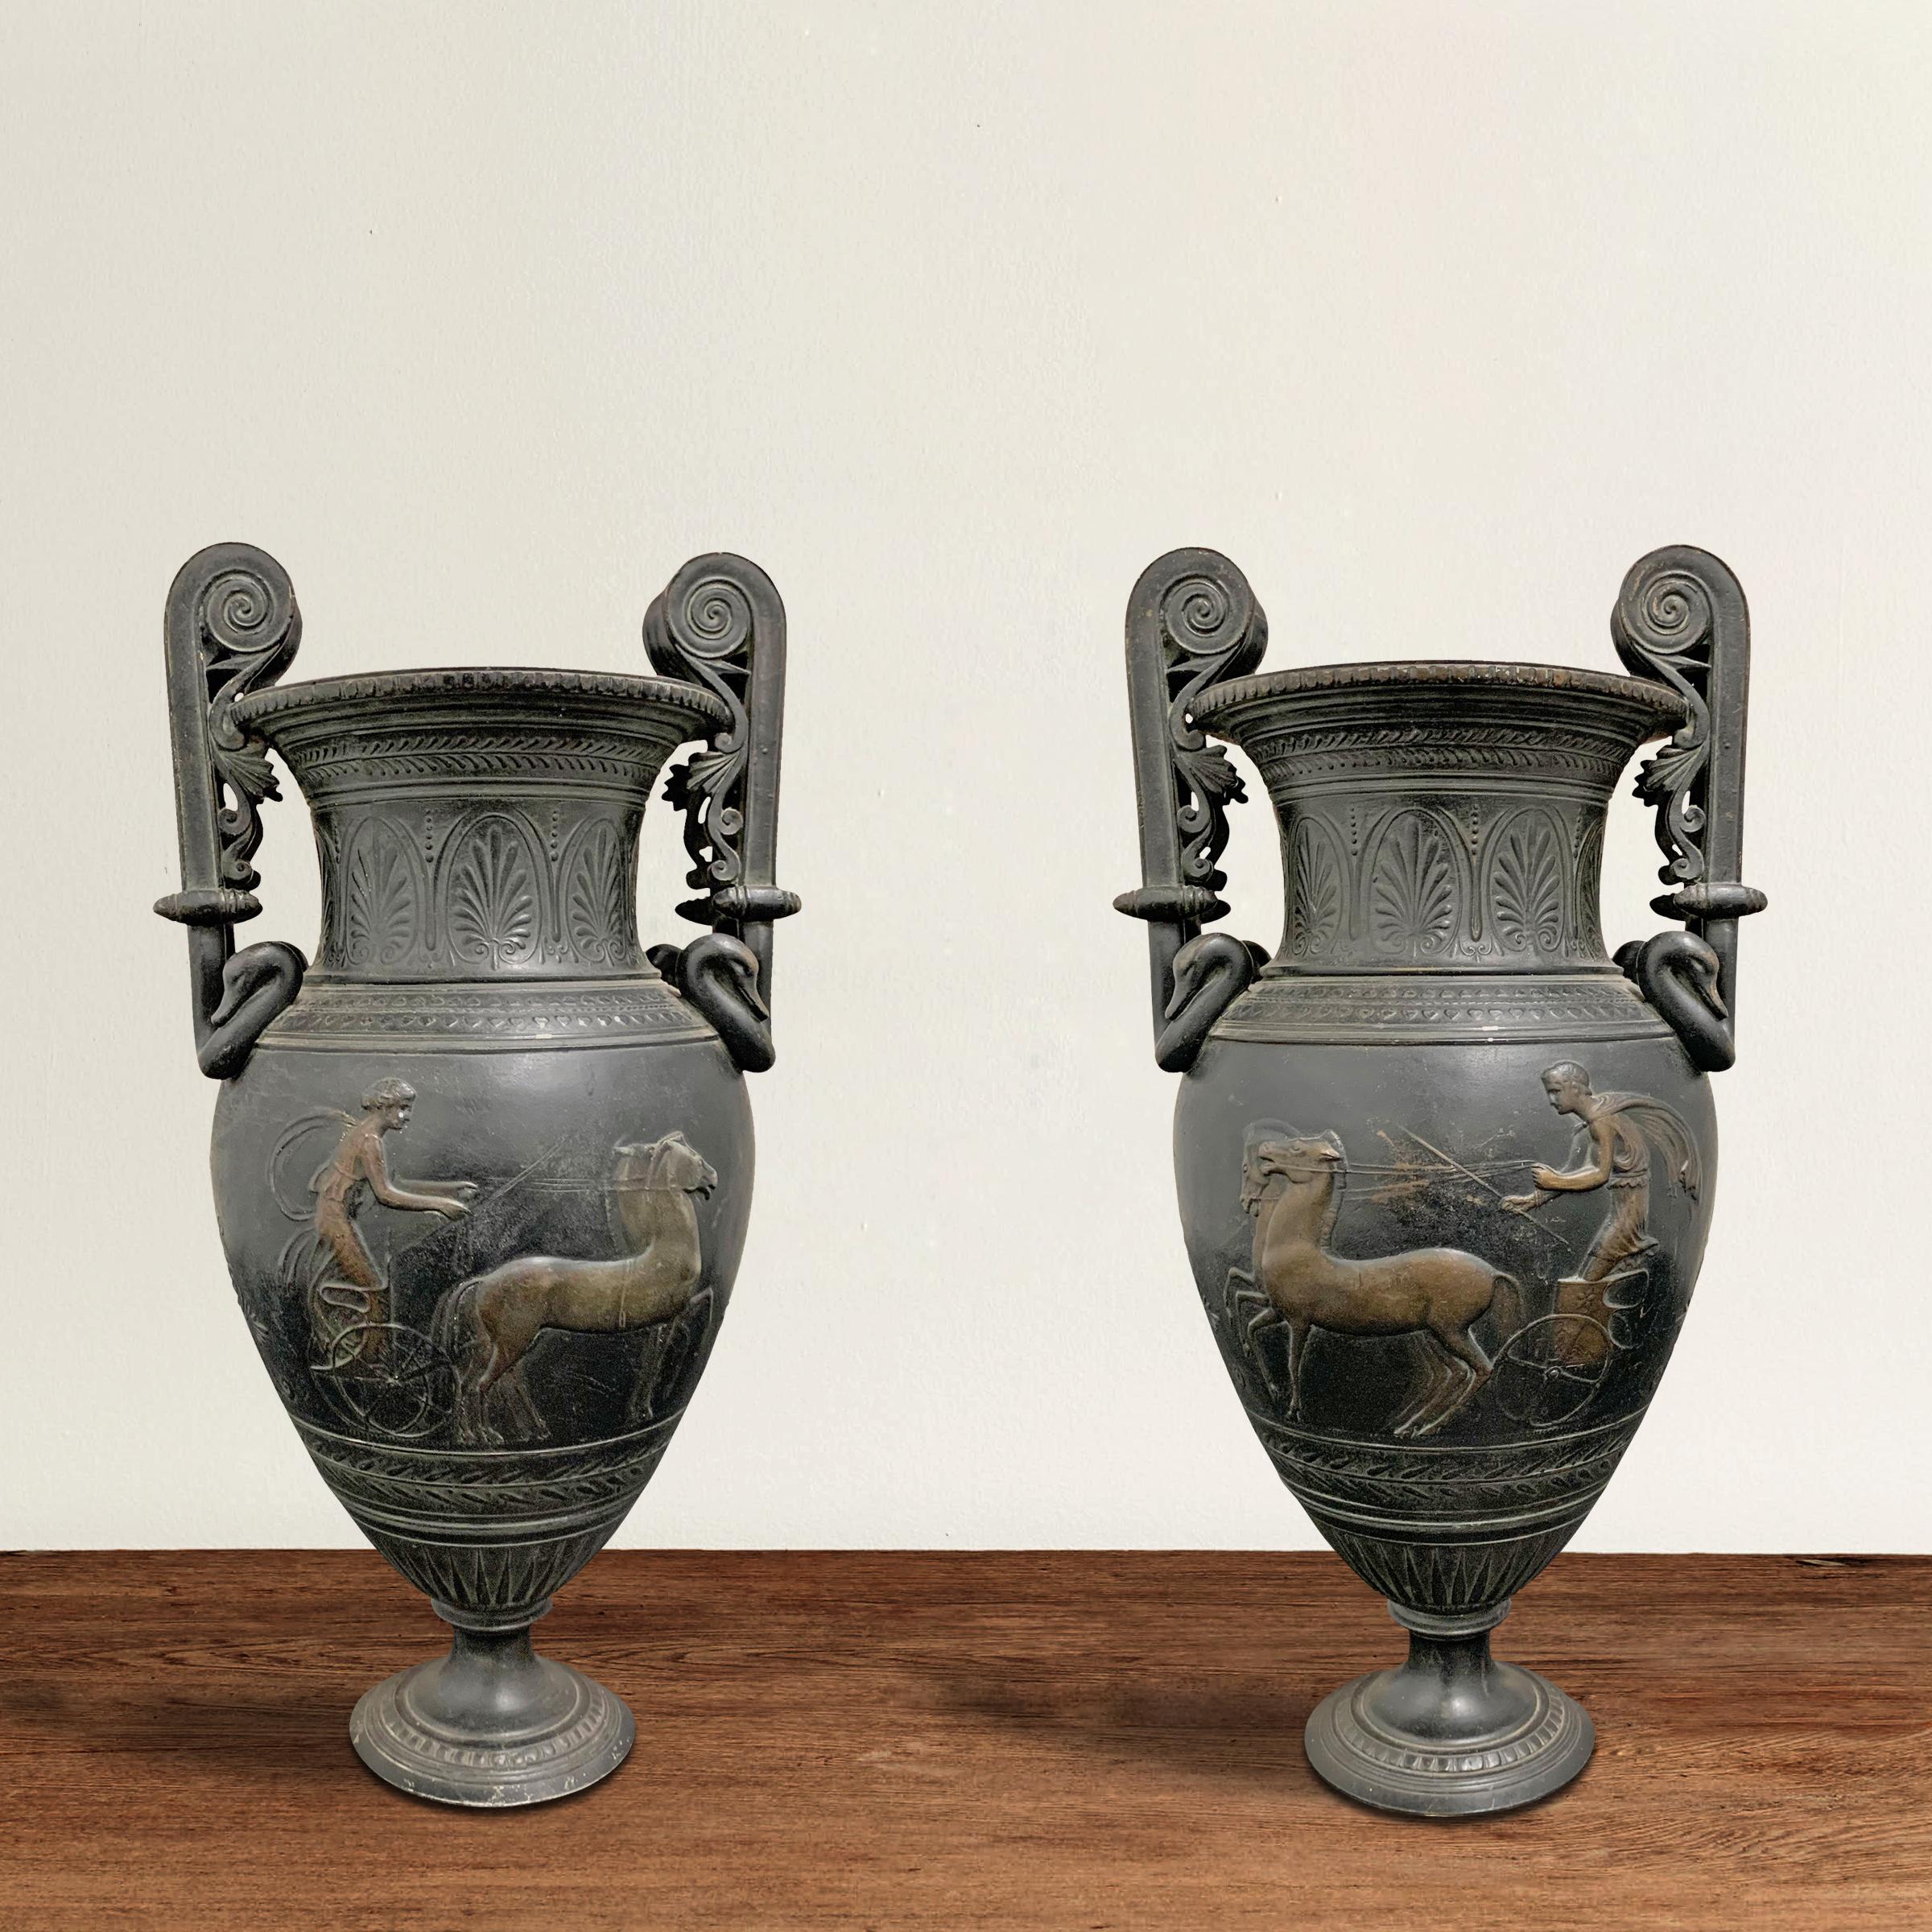 A phenomenal pair of early 20th century French cast bronze Roman-style urns with volute handles decorated with goose heads, and a frieze in low-relief depicting a man and woman chasing each other in chariots being pulled by horses. Classical floral